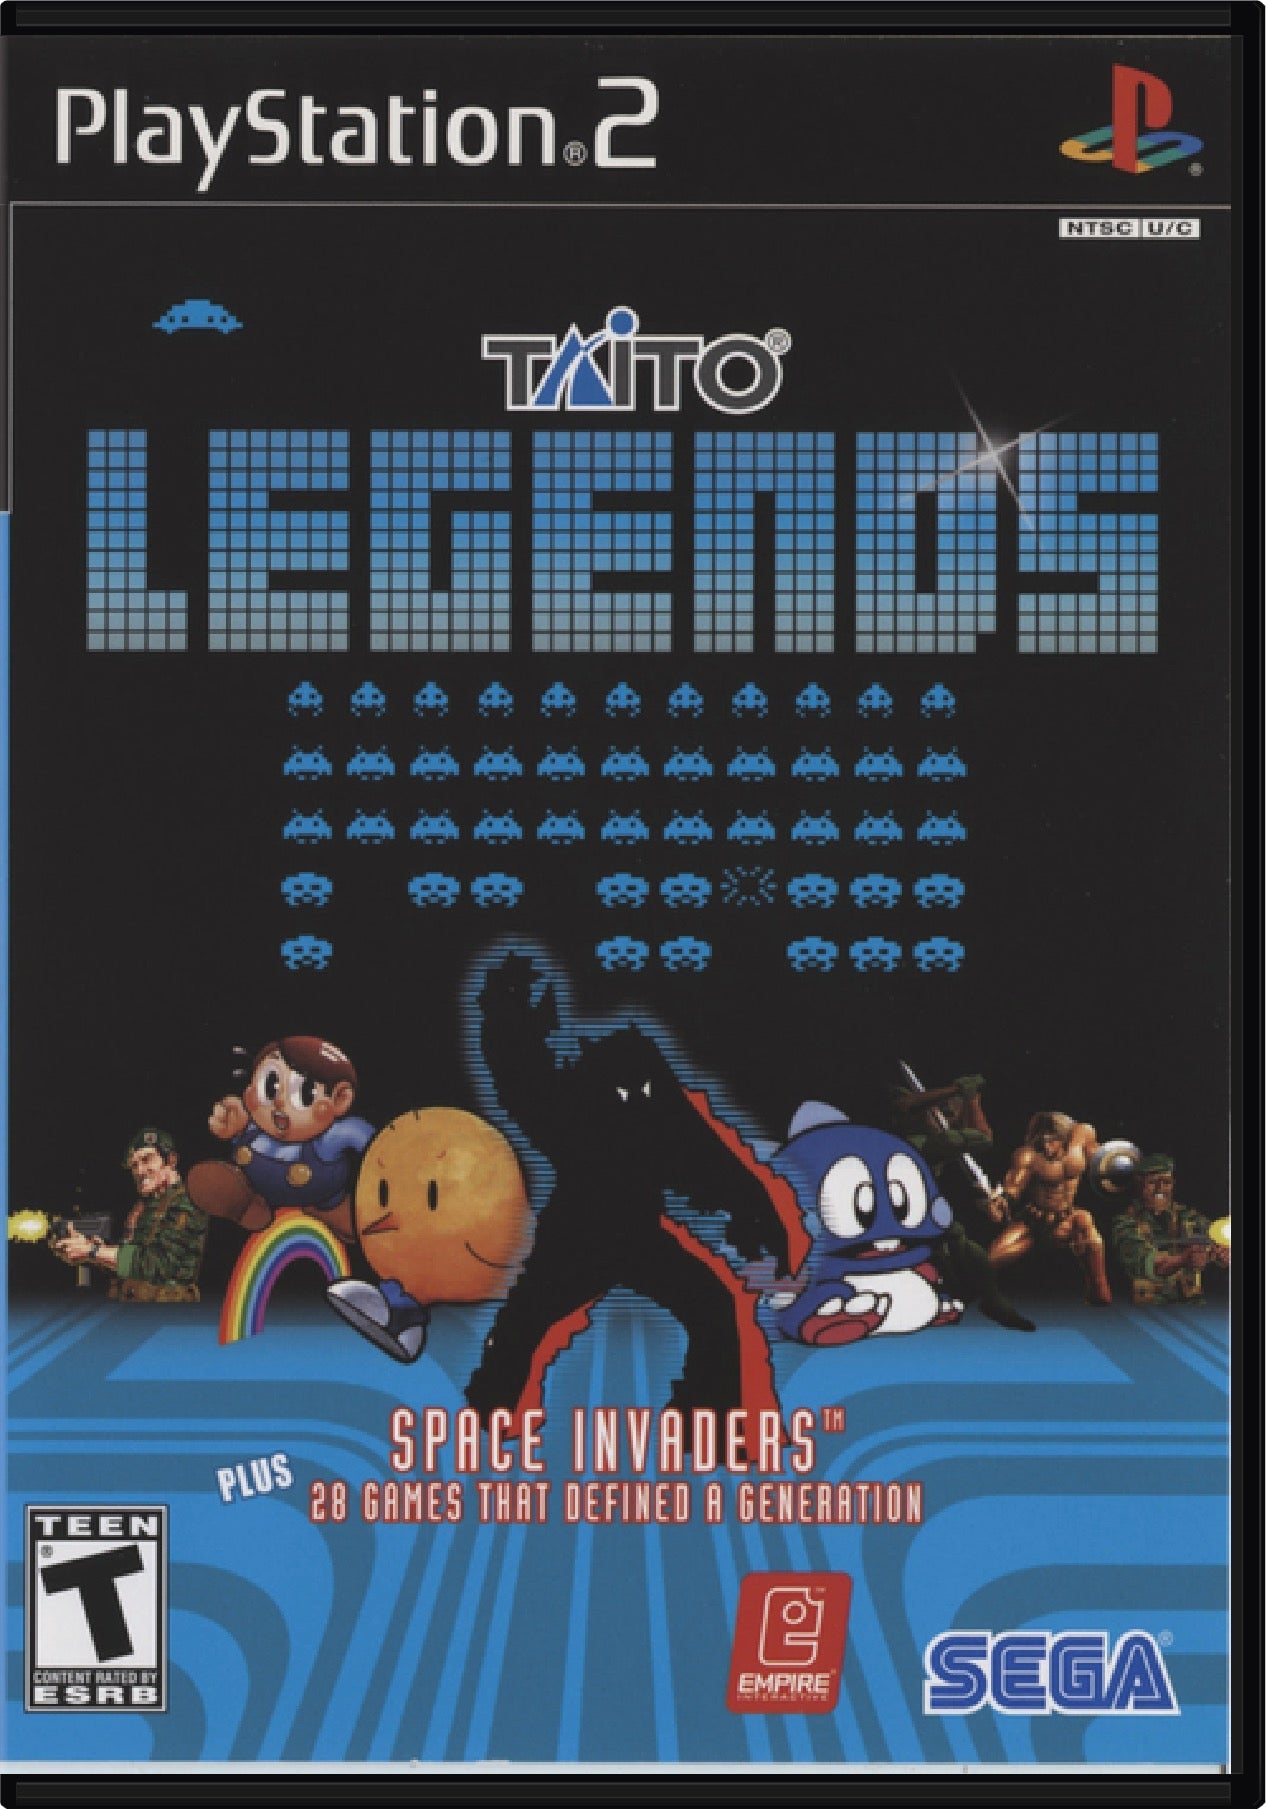 Taito Legends Cover Art and Product Photo